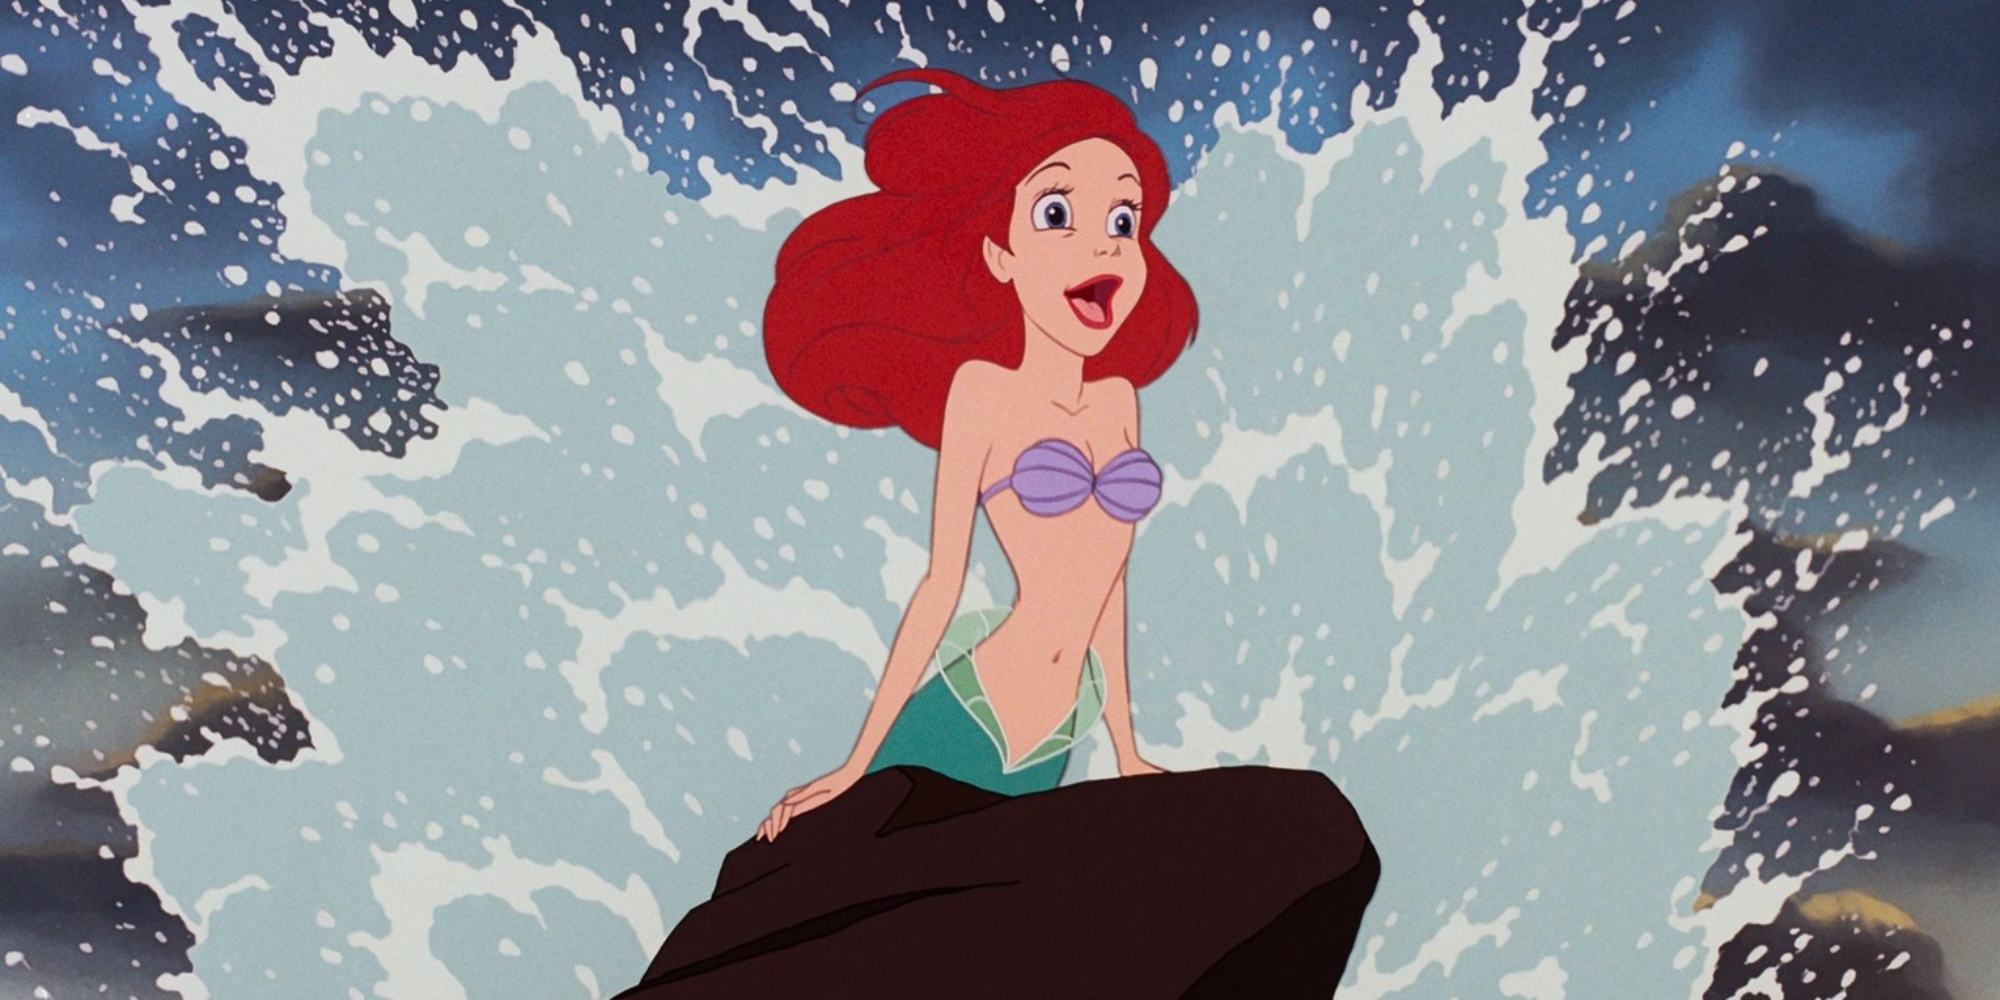 Ariel sitting on a rock with a wave crashing behind her